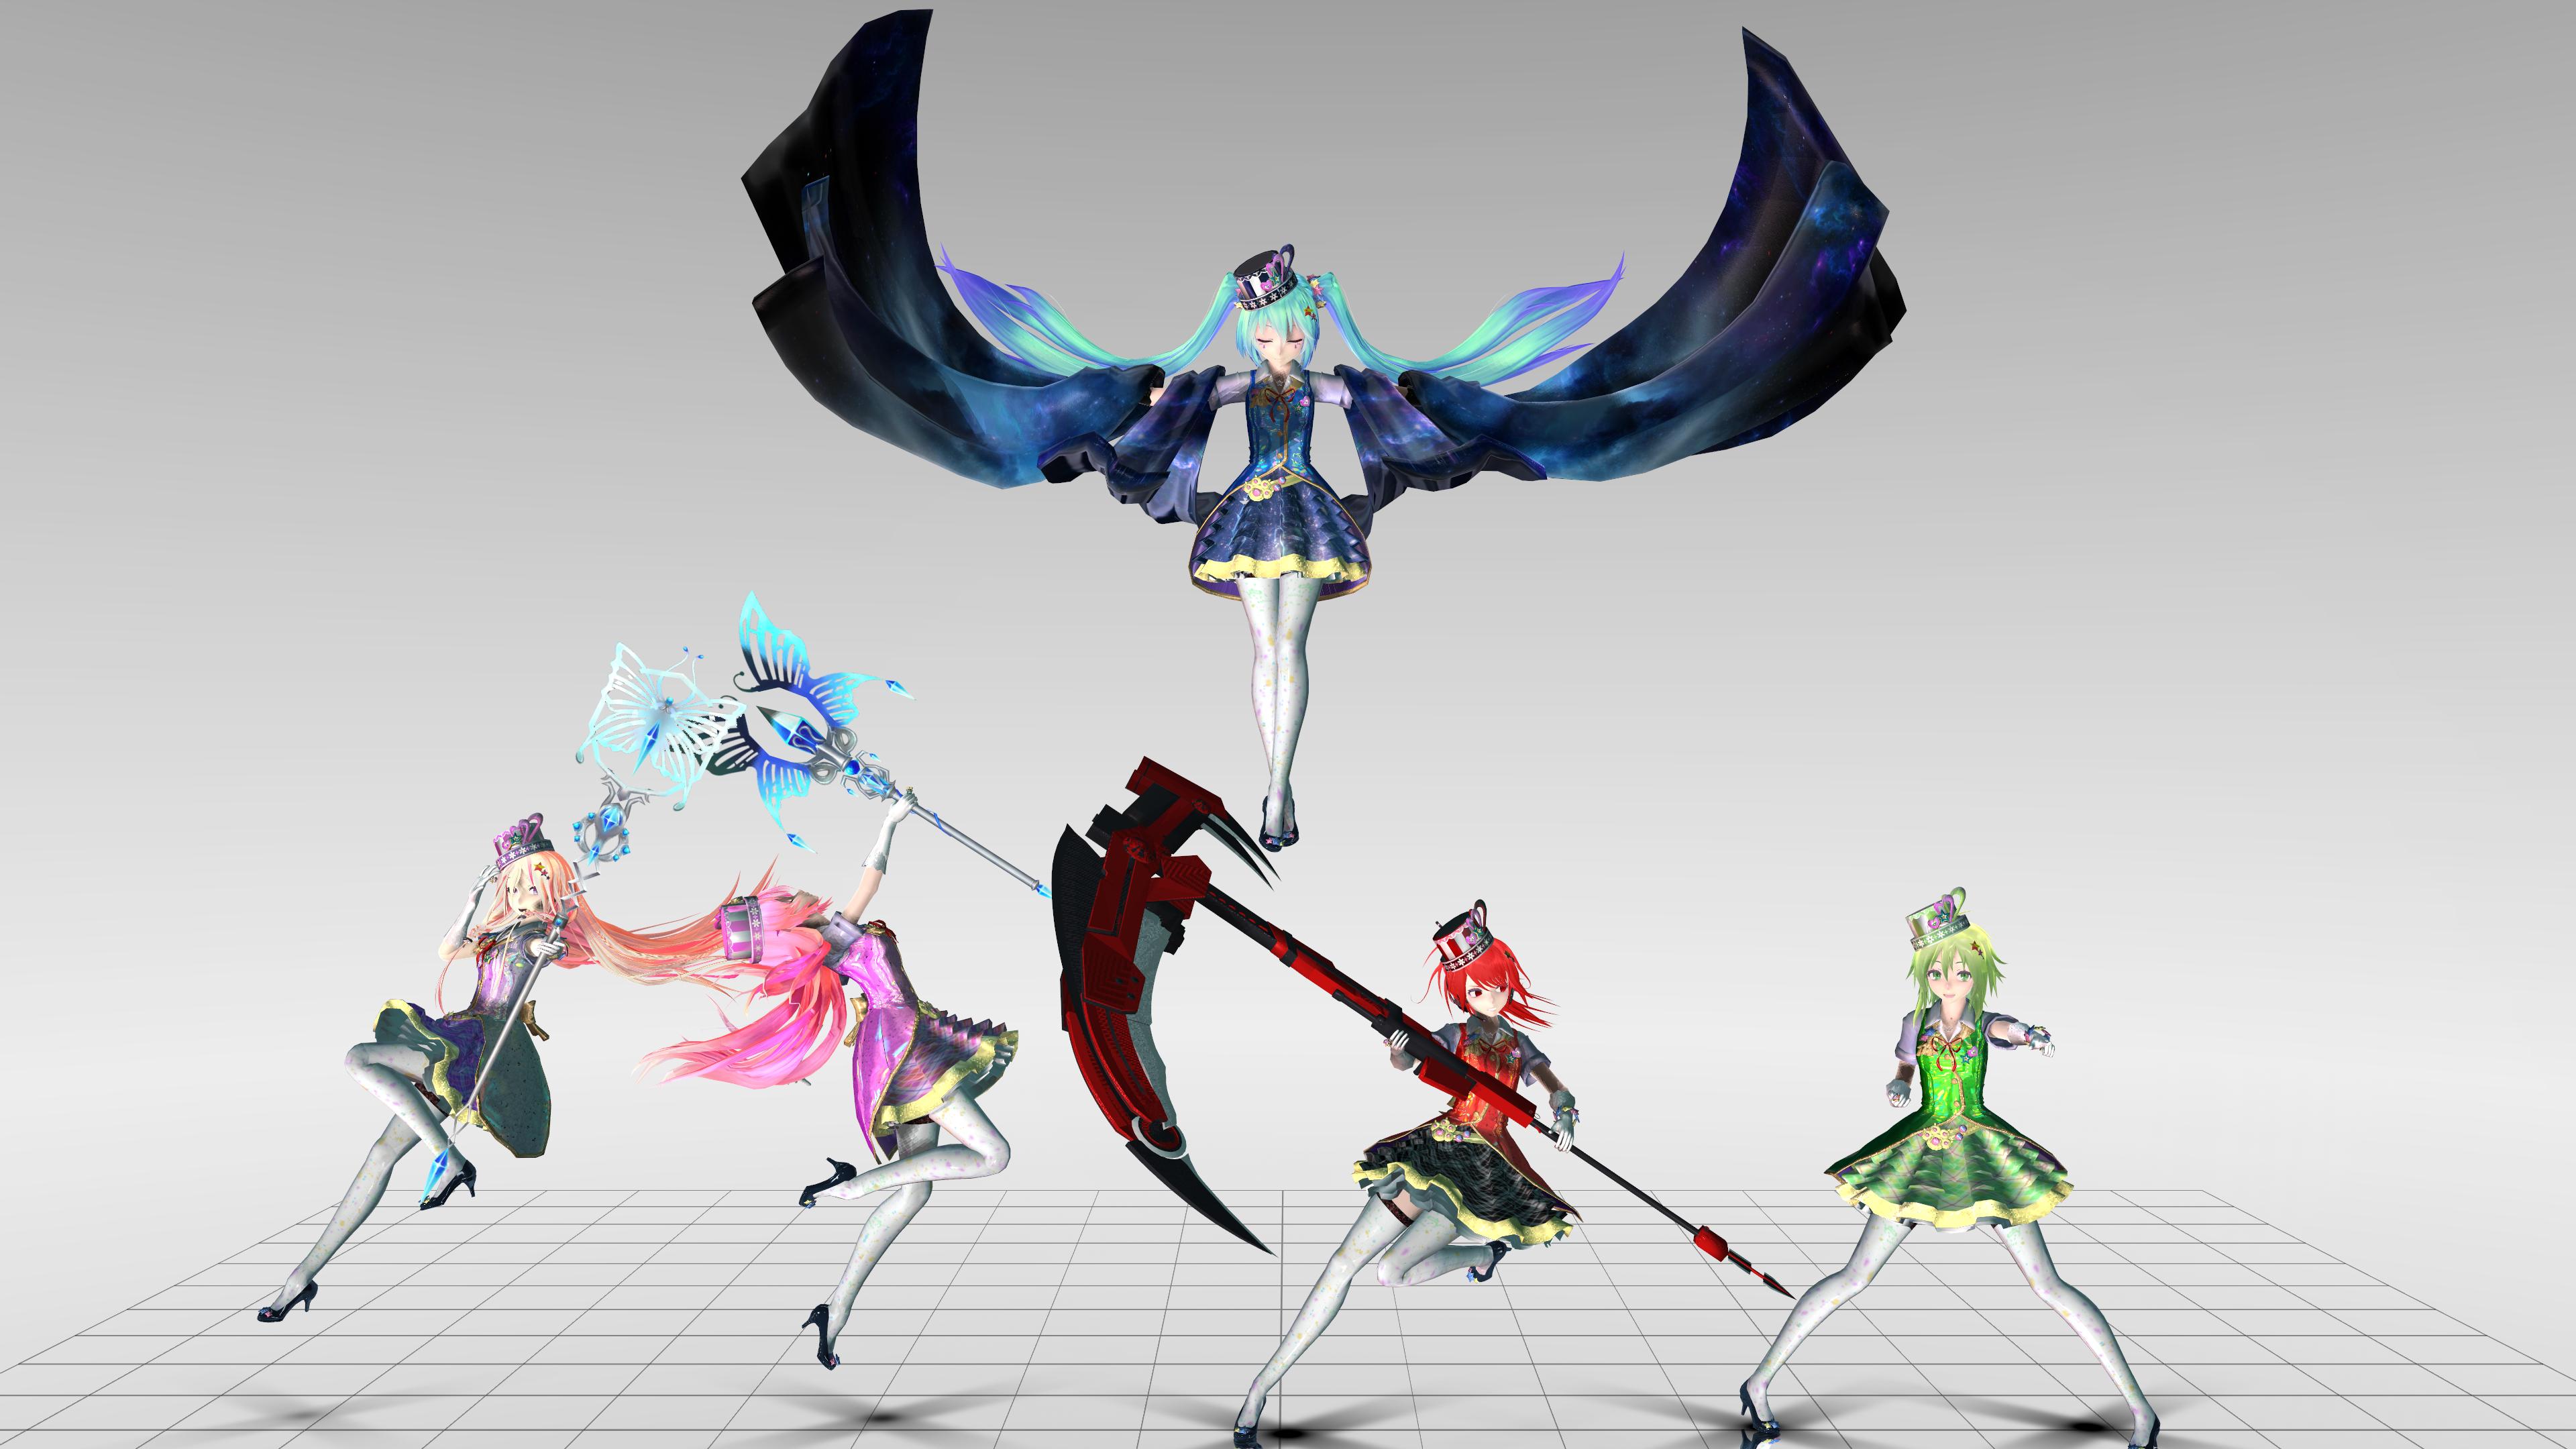 Mmd Magical Girl Poses 1 By Psychomp On Deviantart